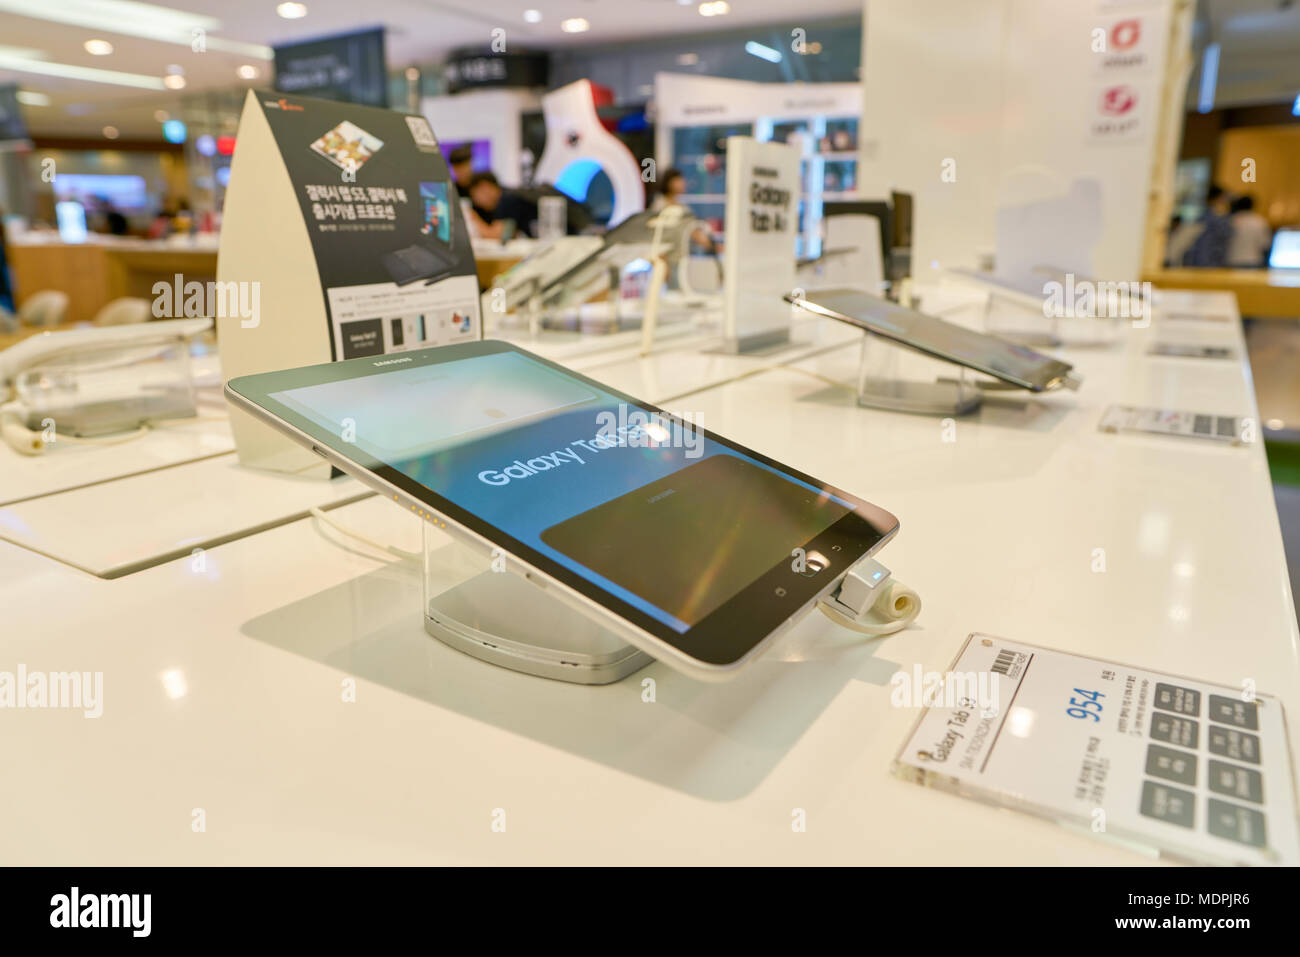 BUSAN, SOUTH KOREA - MAY 28, 2017: Galaxy Tab S3 on display at Lotte Department Store in Busan. Stock Photo